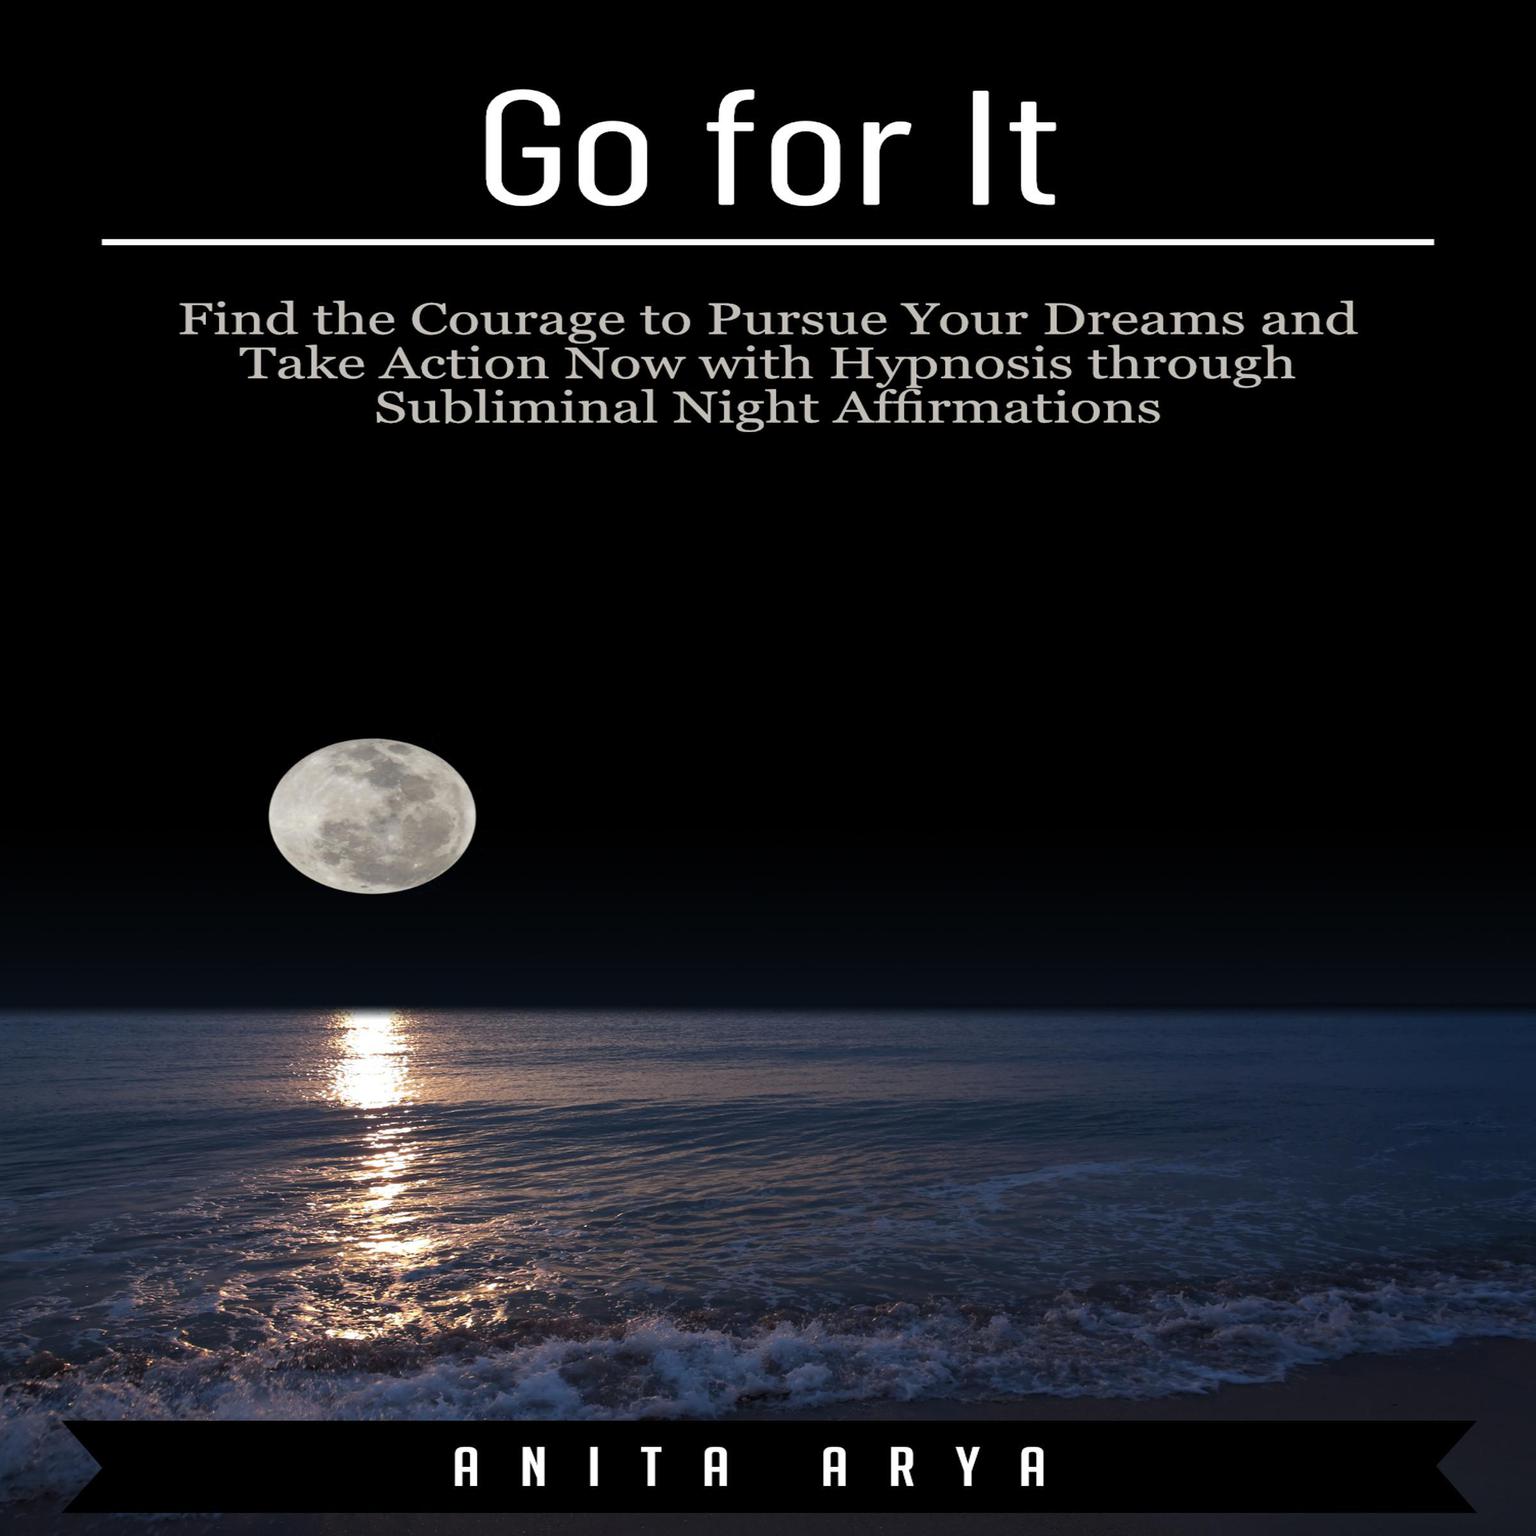 Go for It: Find the Courage to Pursue Your Dreams and Take Action Now with Hypnosis through Subliminal Night Affirmations Audiobook, by Anita Arya  